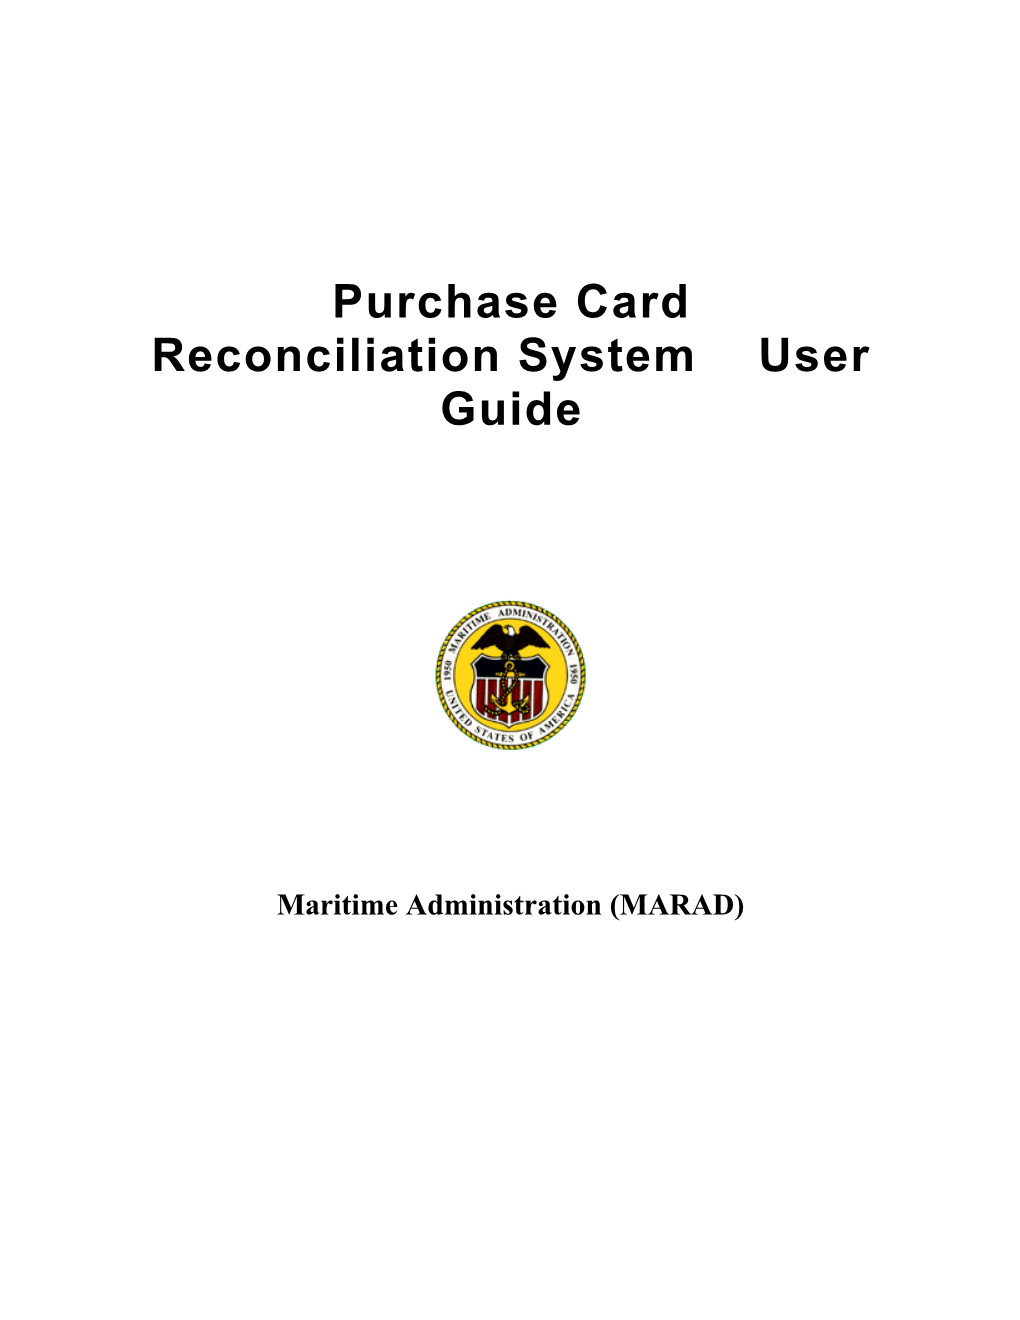 Purchase Card Reconciliation System User Guide